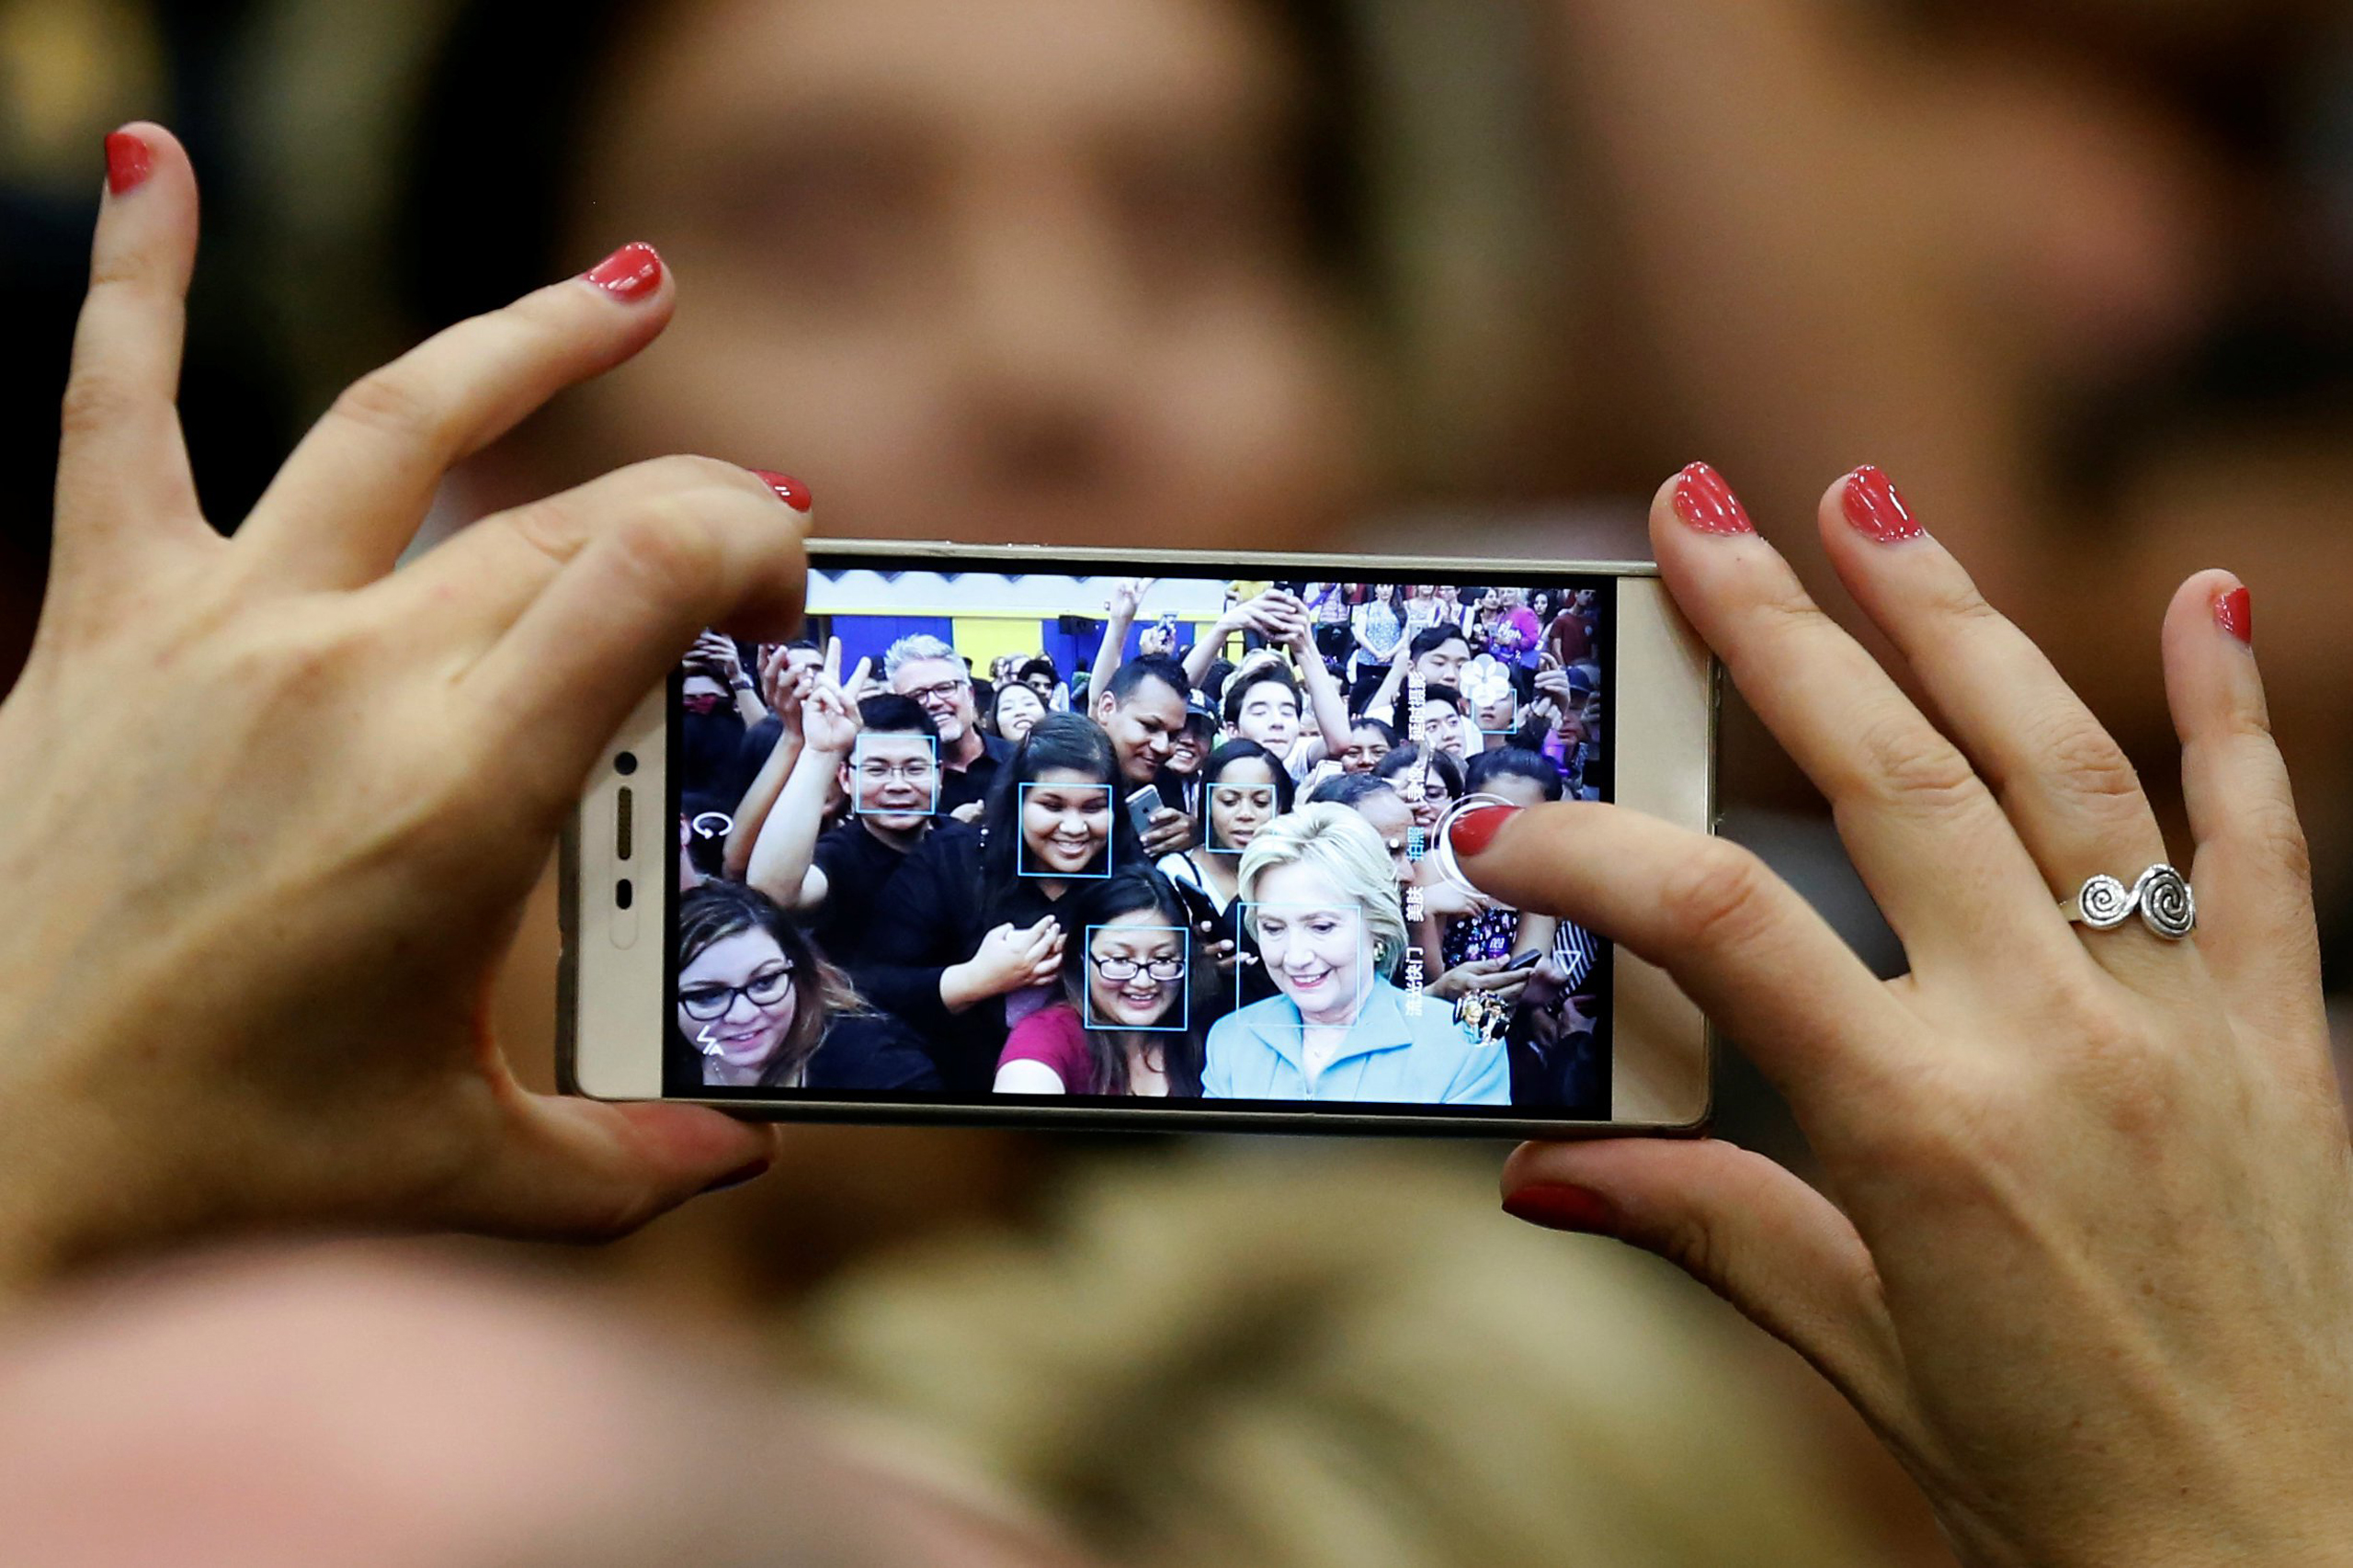 U.S. Democratic presidential candidate Hillary Clinton takes a selfie with supporters after speaking at the University of California Riverside in Riverside, California, U.S. May 24, 2016.  REUTERS/Lucy Nicholson